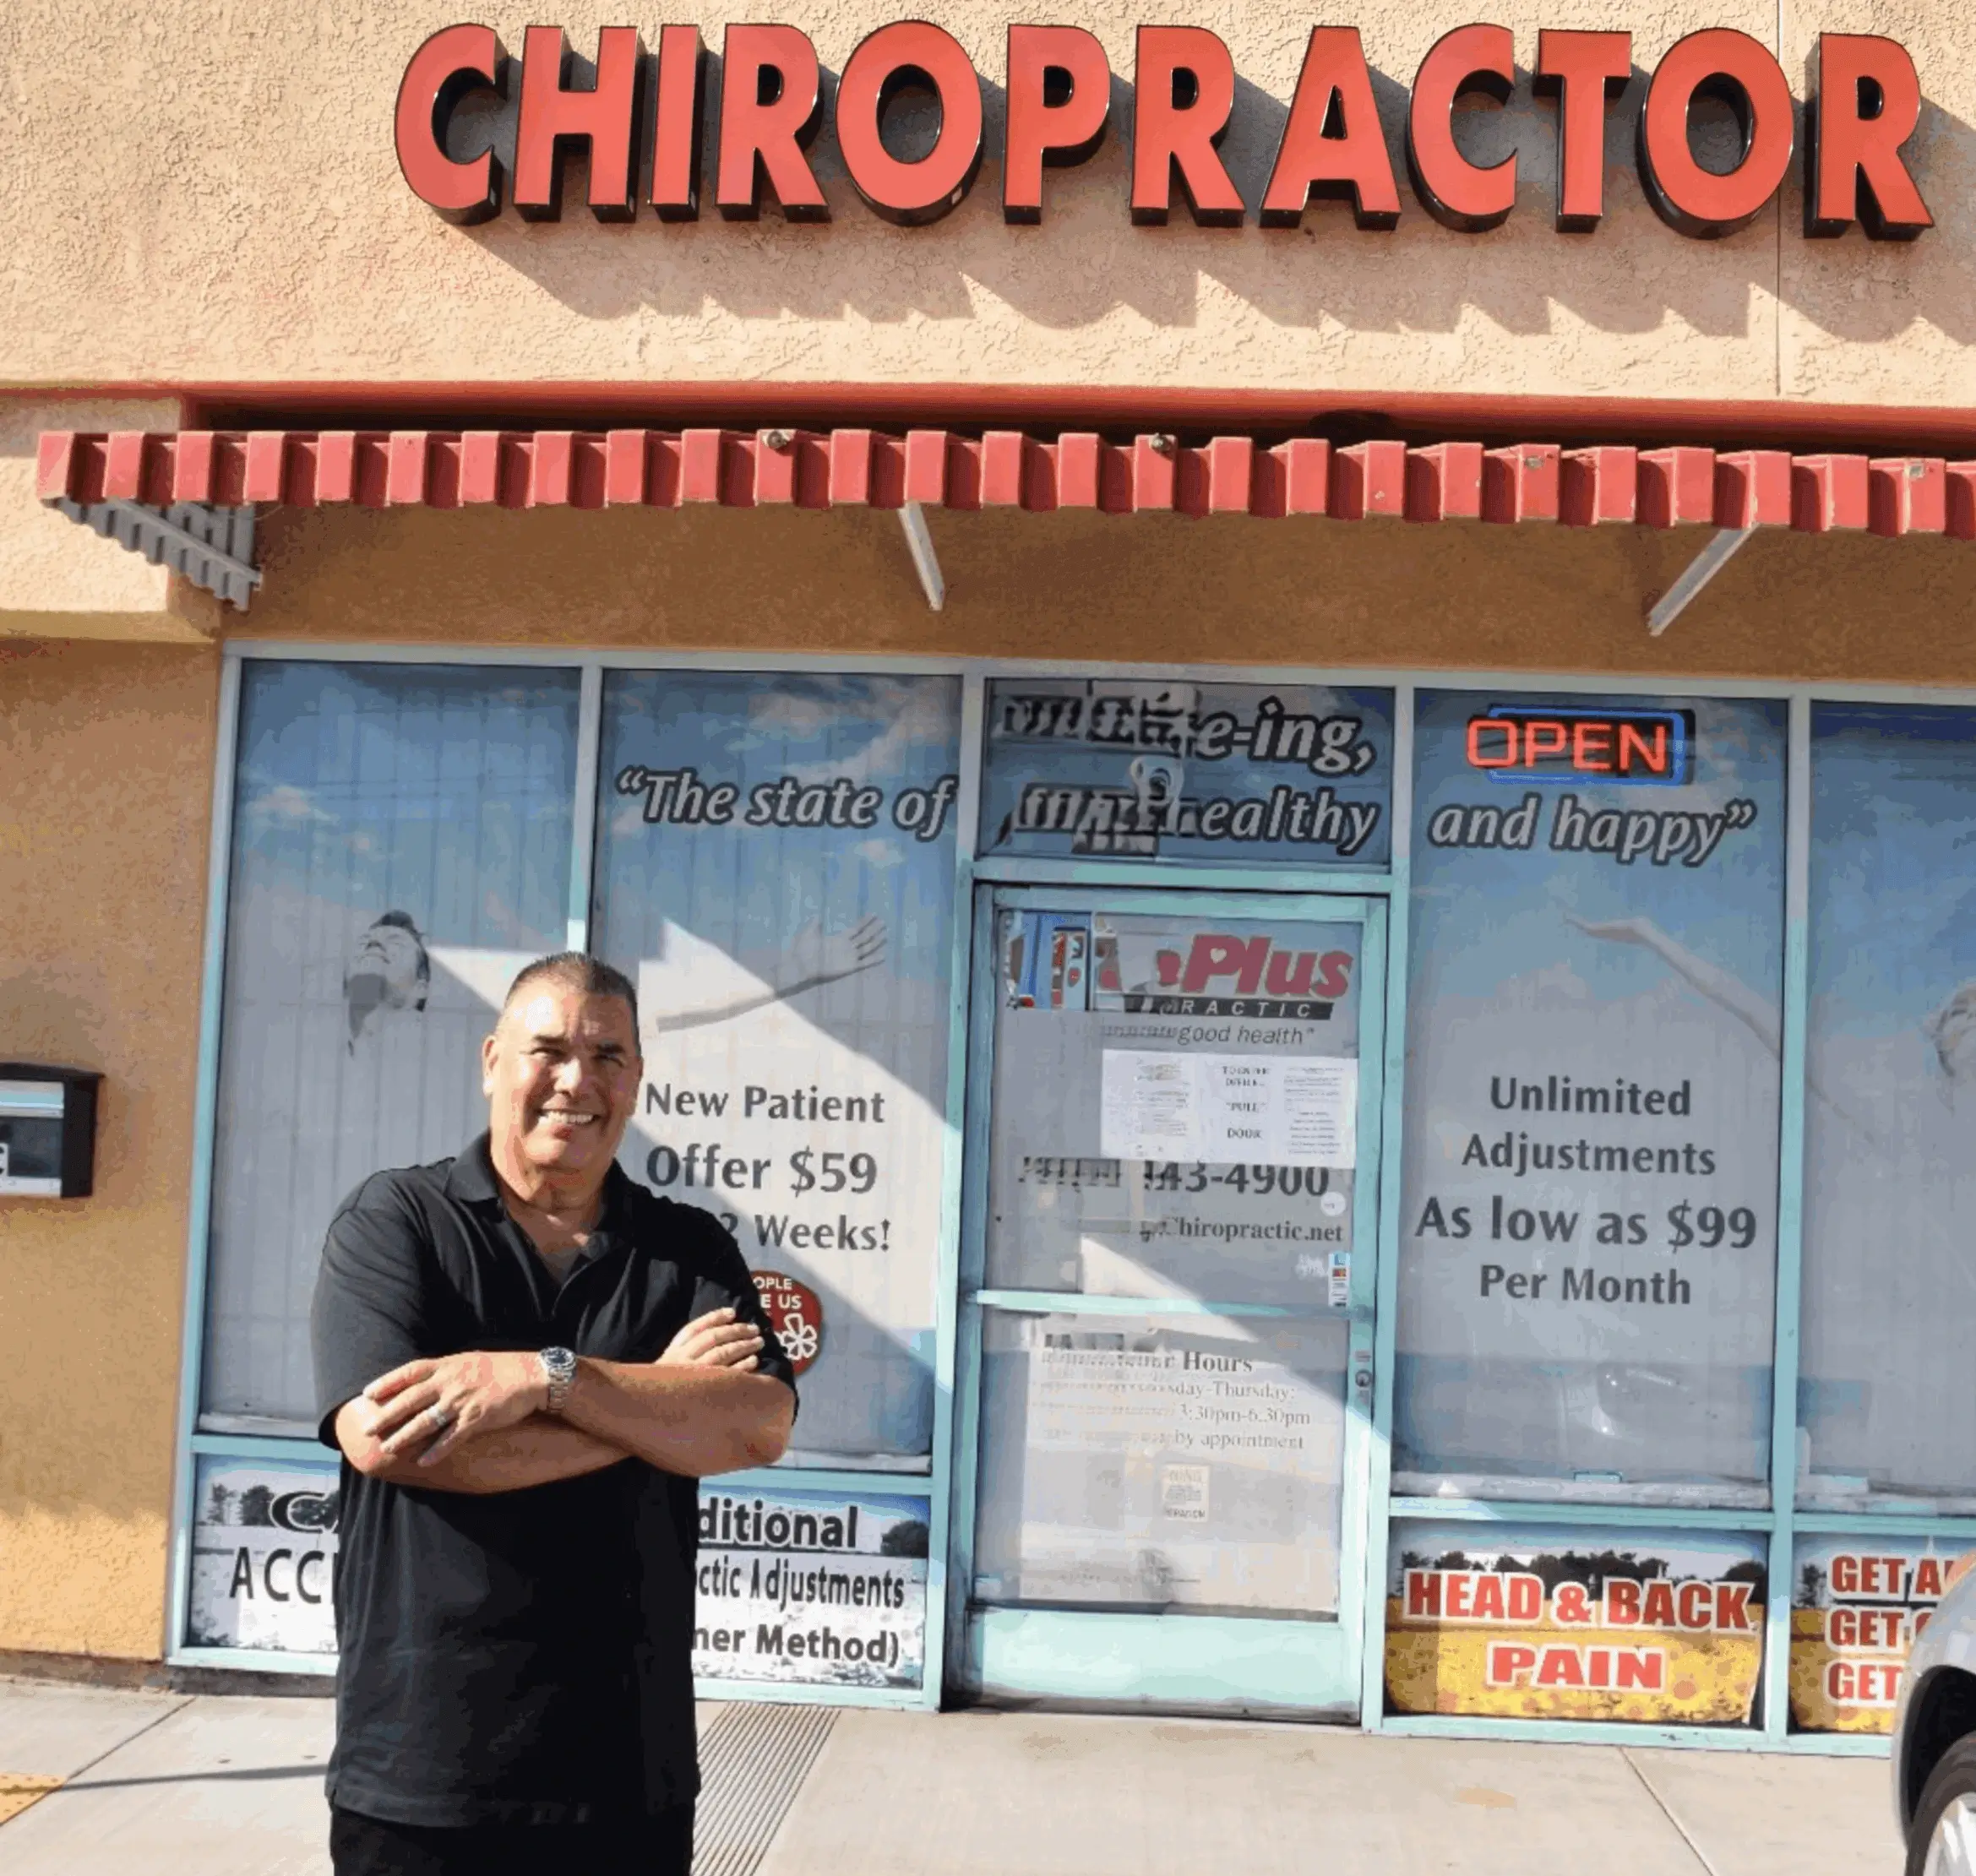 Westminster Chiropractor Dr. Phil - The Ring Dinger® Chiropractic